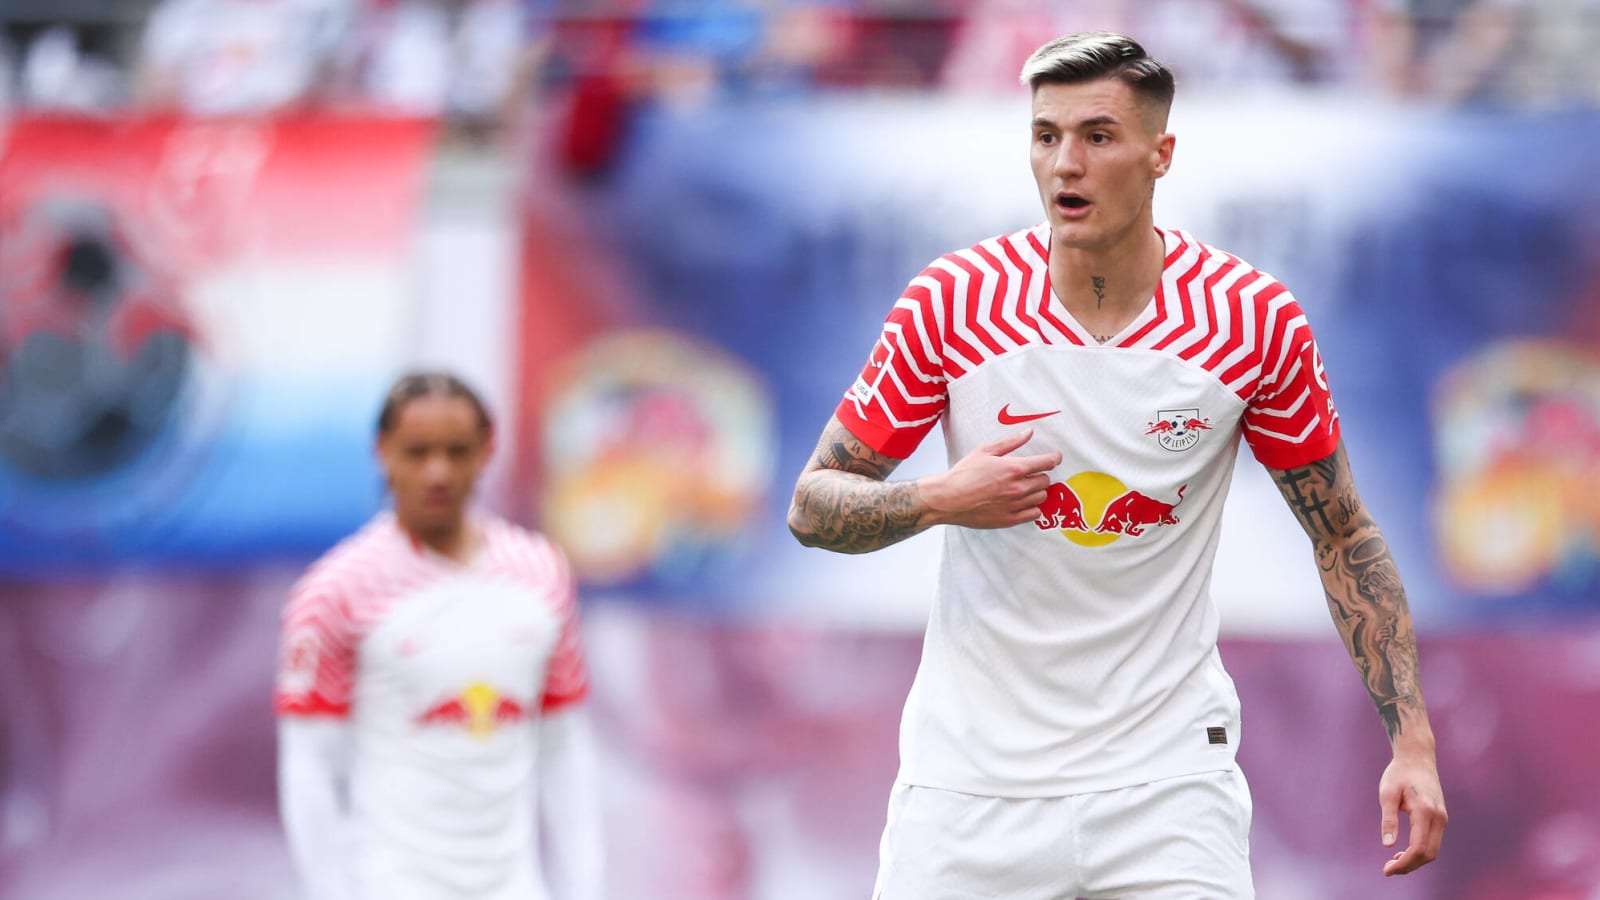 Arsenal join race for highly-rated RB Leipzig forward; camp have attended games at Old Trafford